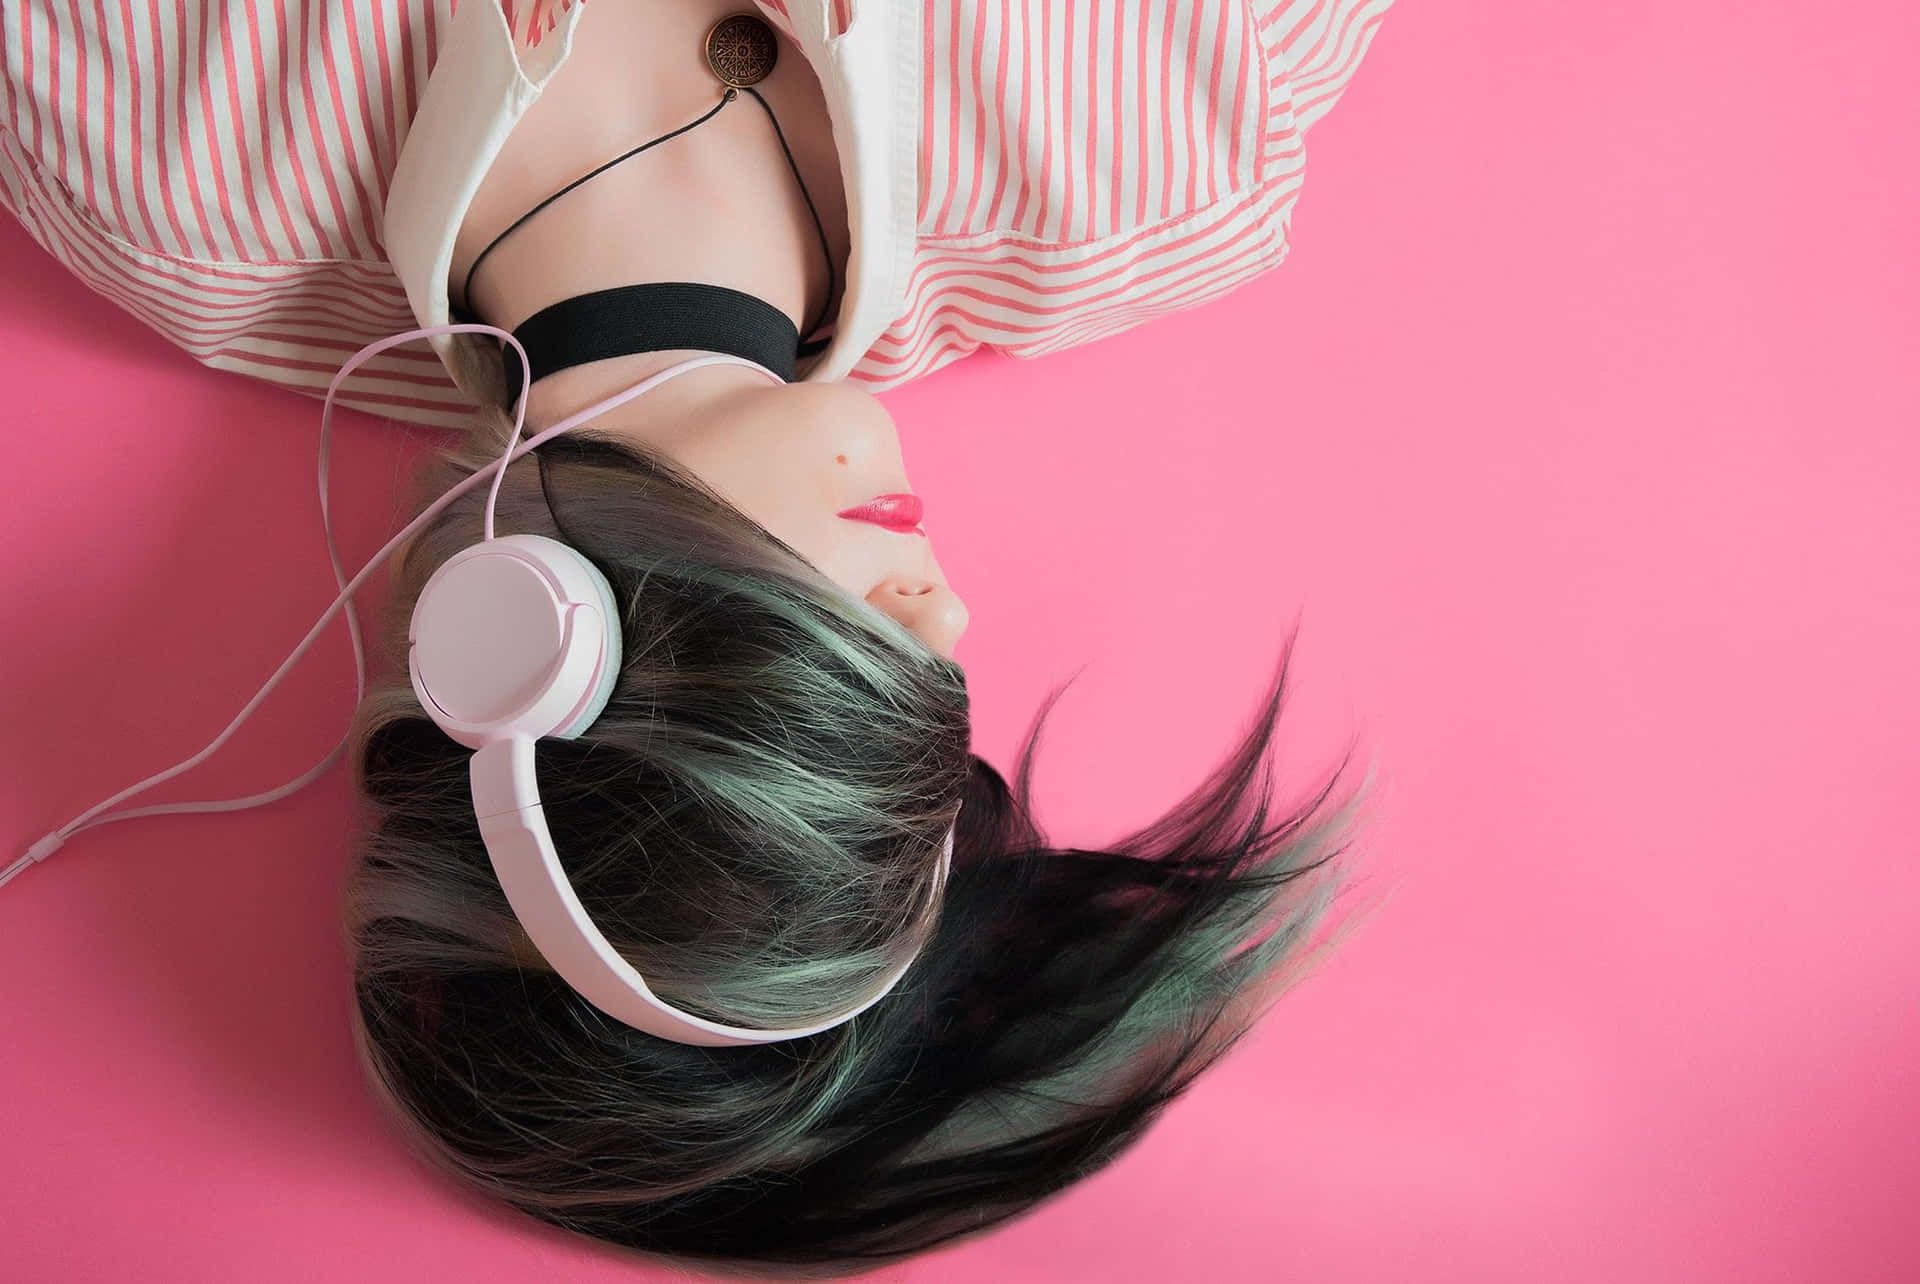 A Woman With Headphones On Wallpaper